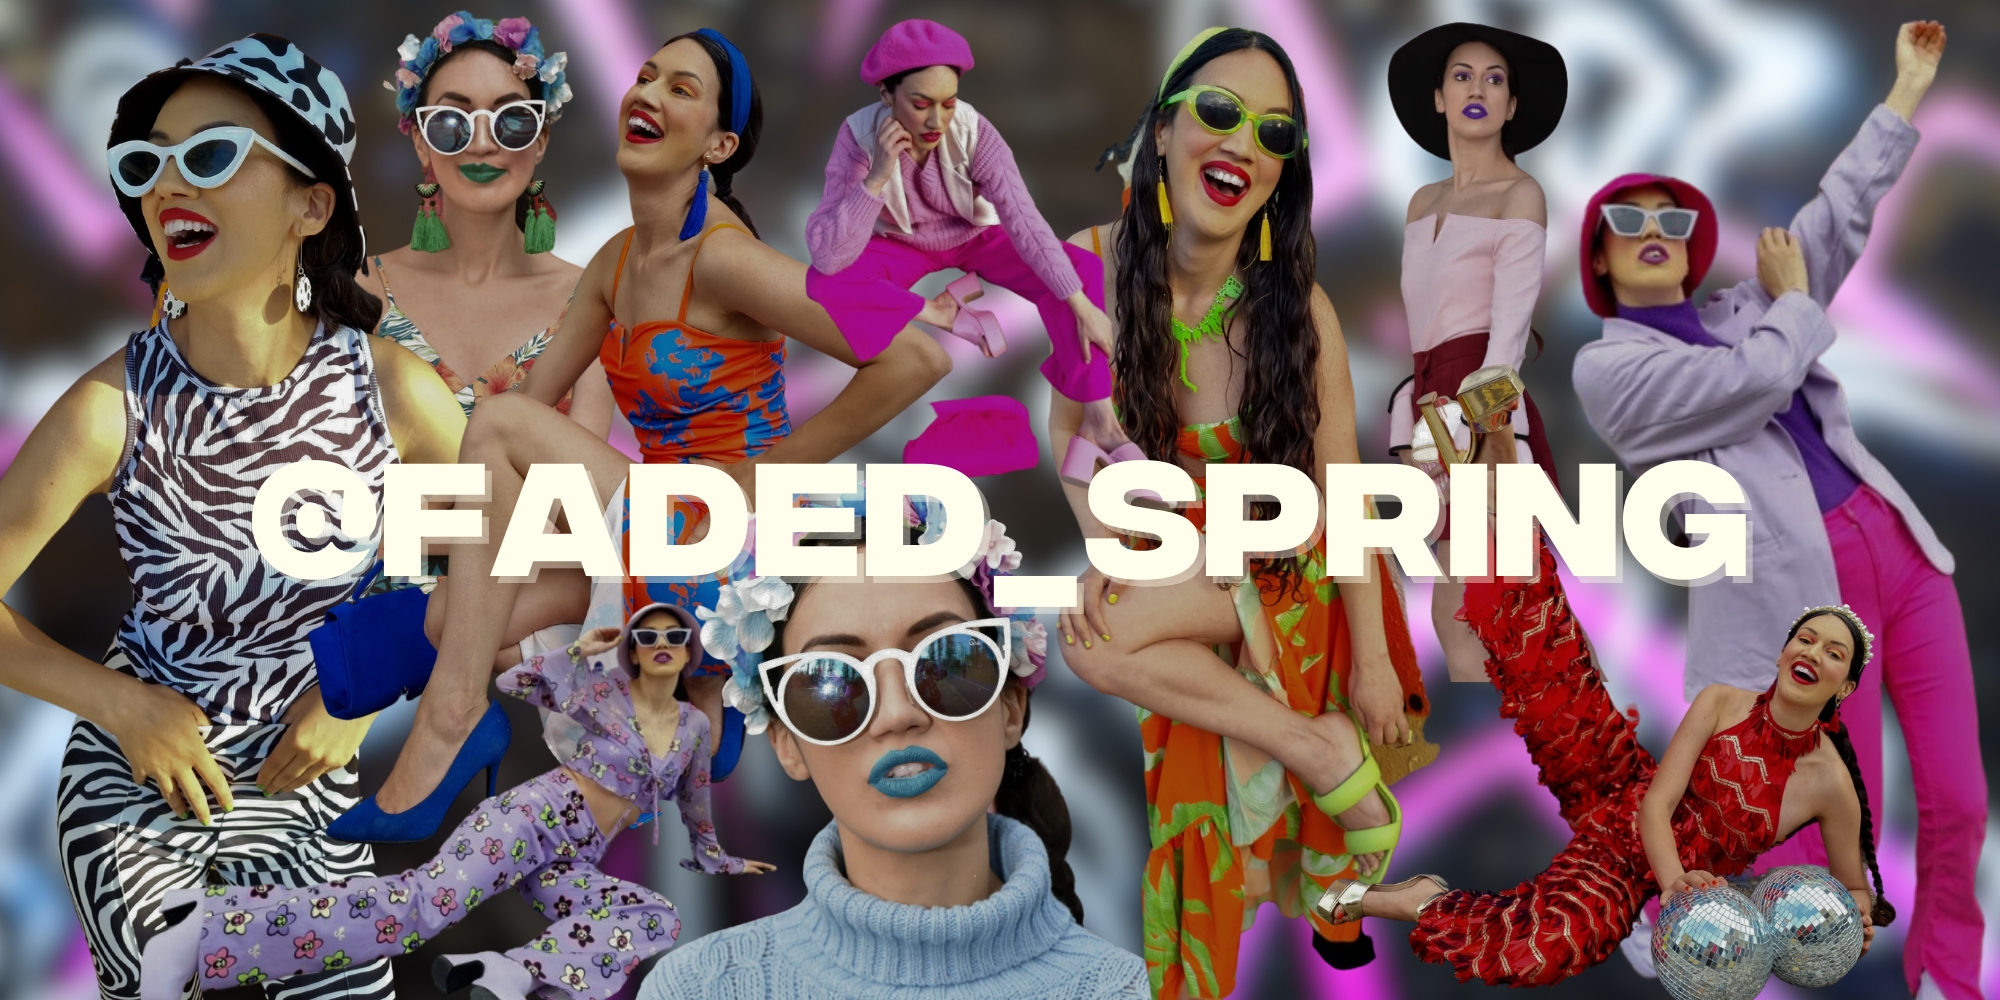 Influencer Sessions: Get To Know @faded_spring